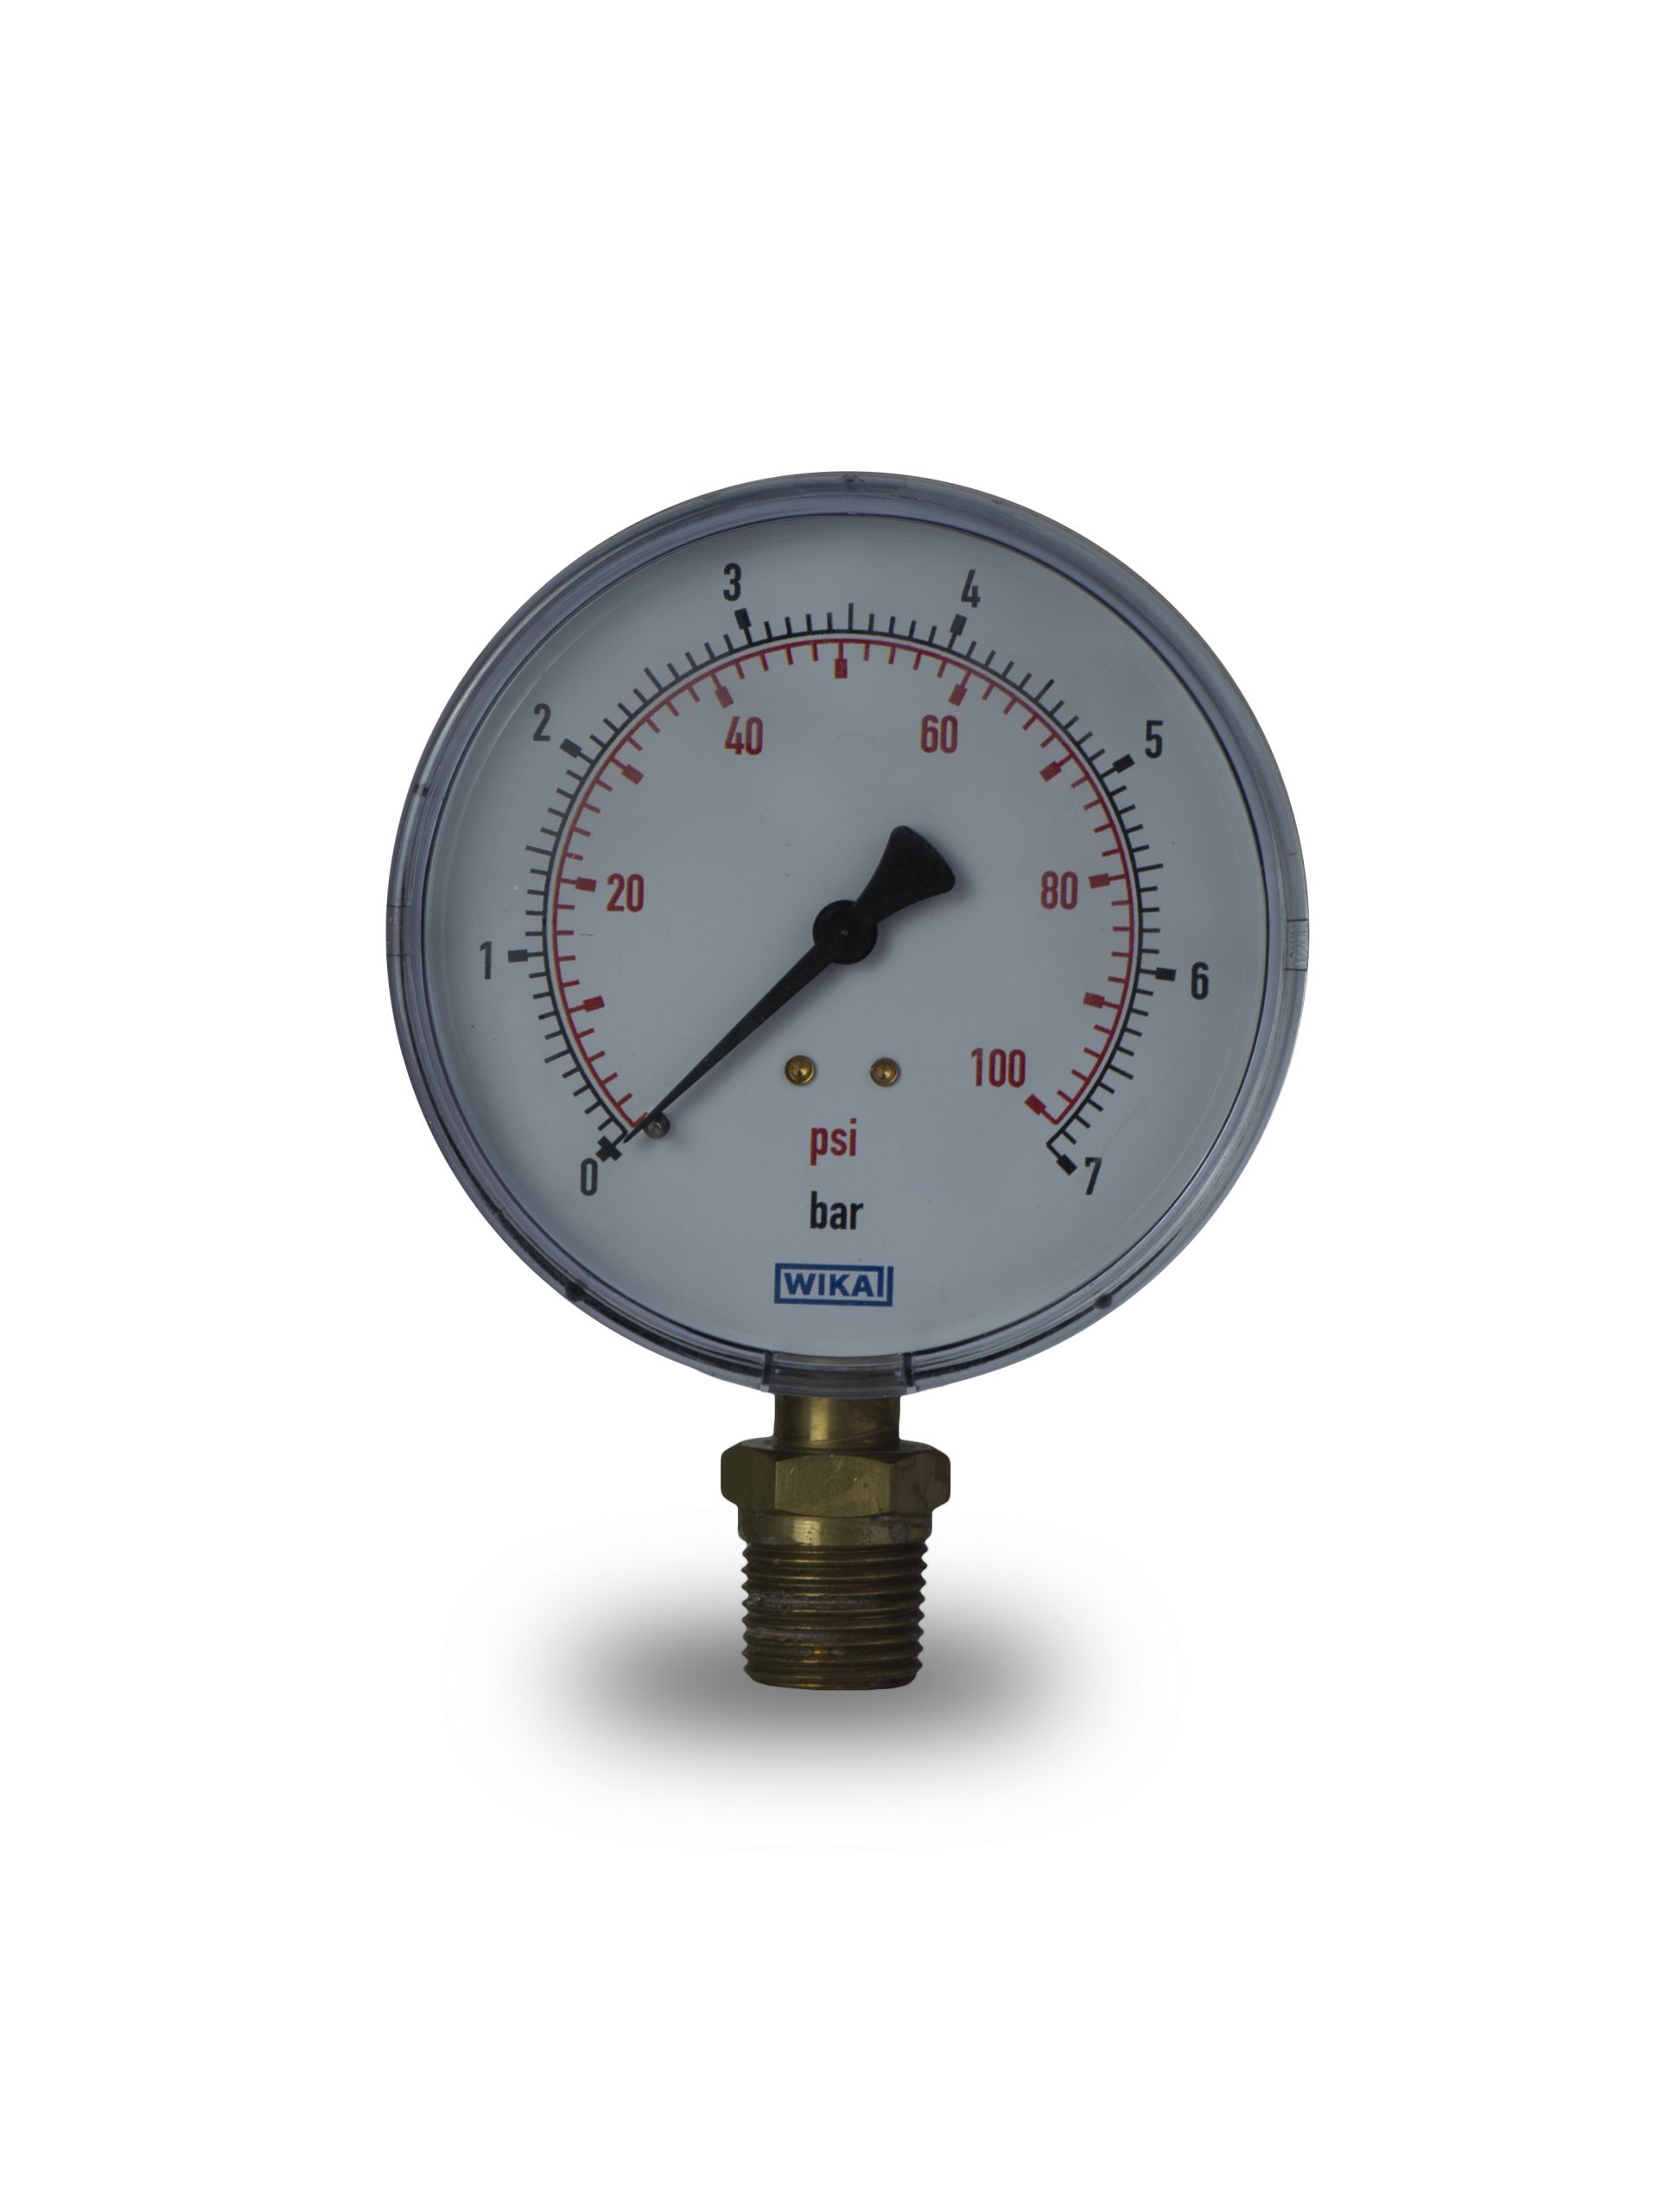 PRESSURE GAUGE 0-7 BAR DIAMETER 4 Inches CONNECTION 1/2 Inches , WIKA from Gas Equipment Company Llc Abu Dhabi, UNITED ARAB EMIRATES